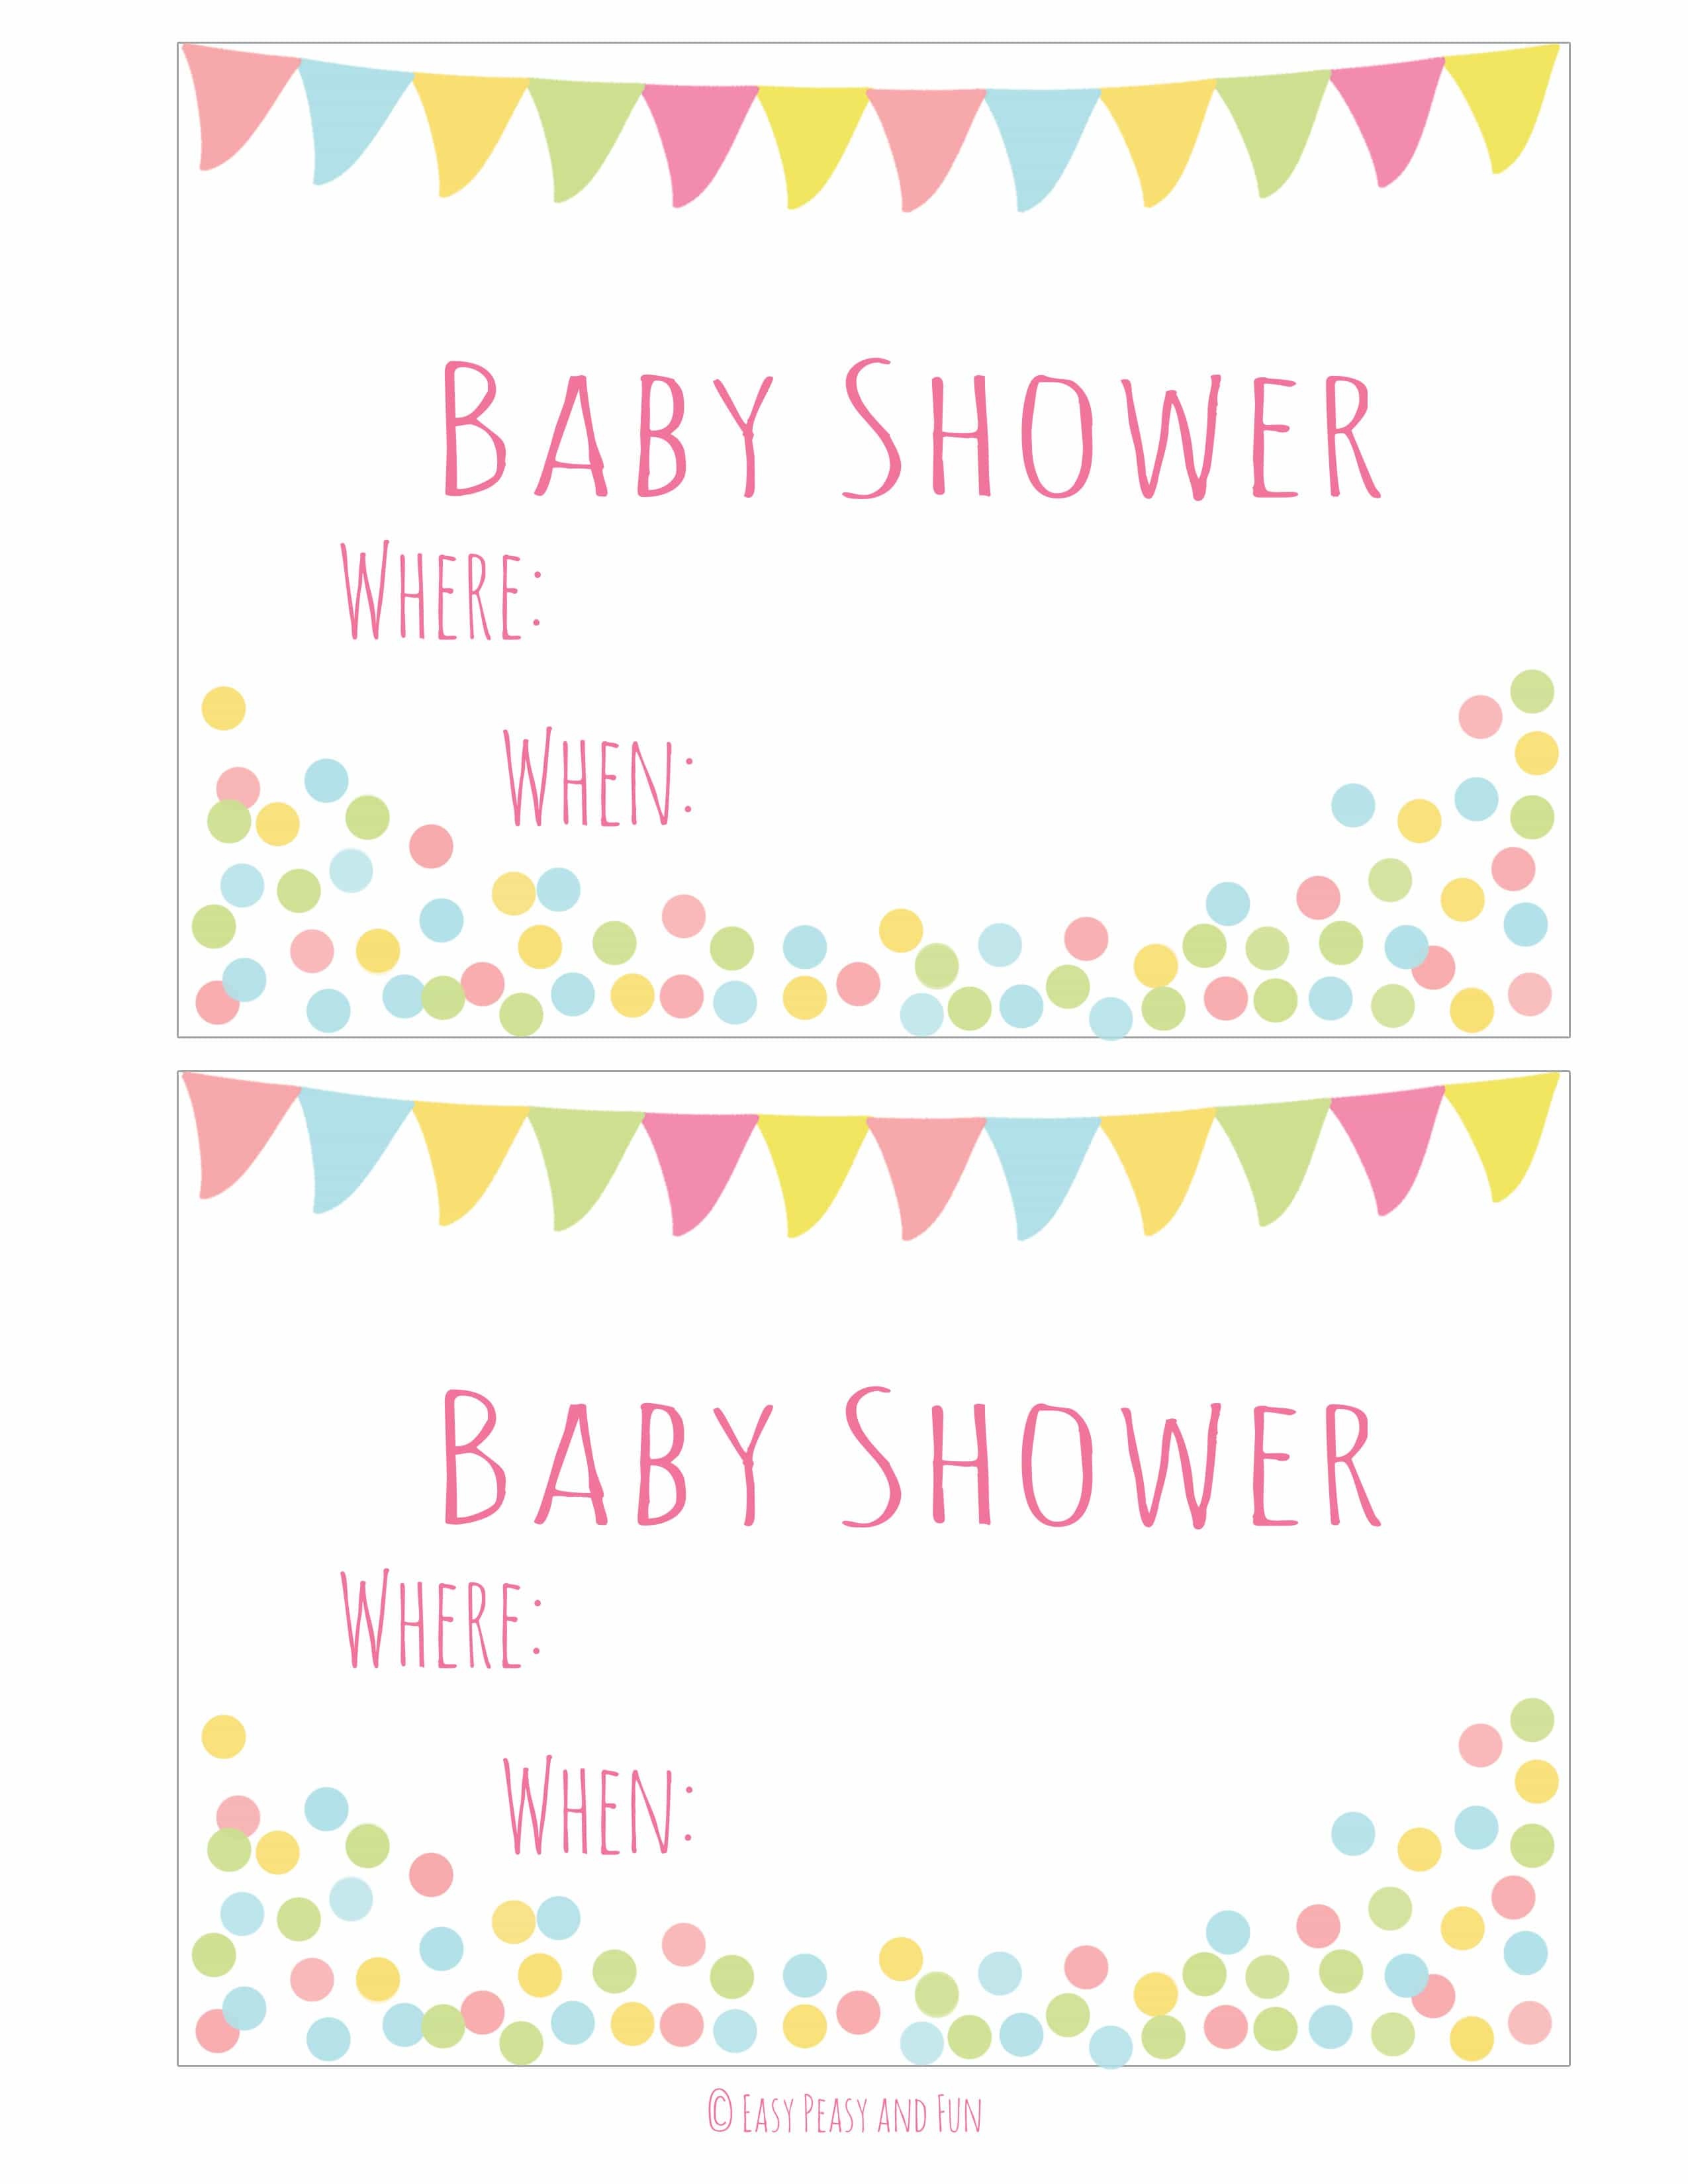 Baby Shower Invitation Free Template - Demir.iso-Consulting.co - Free Printable Baby Shower Cards Templates